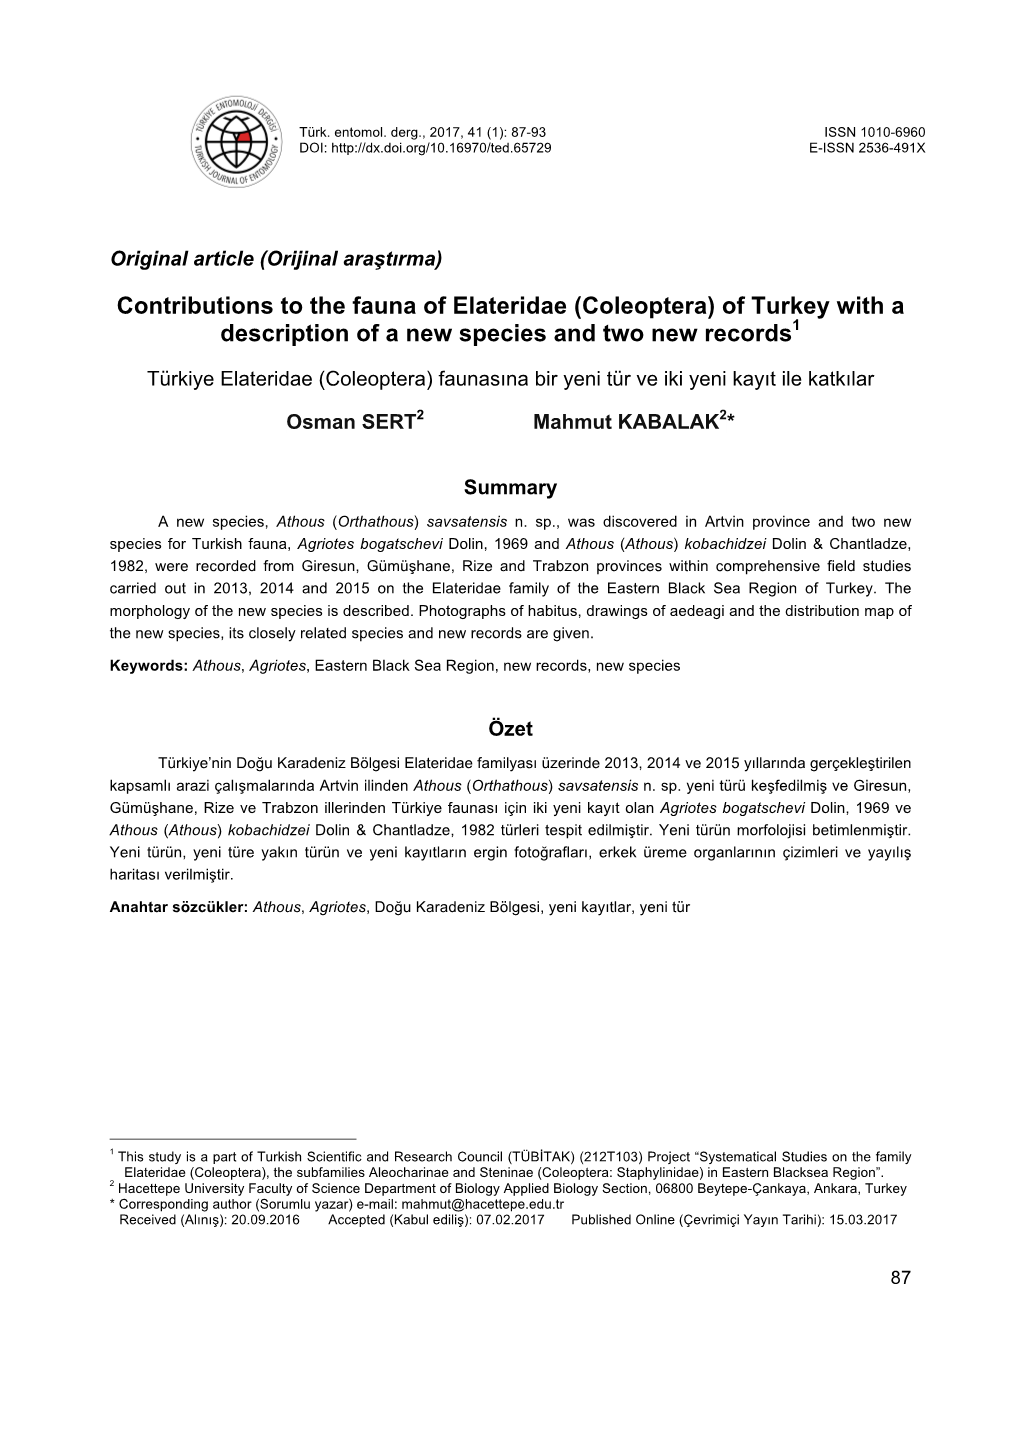 Coleoptera) of Turkey with a Description of a New Species and Two New Records1